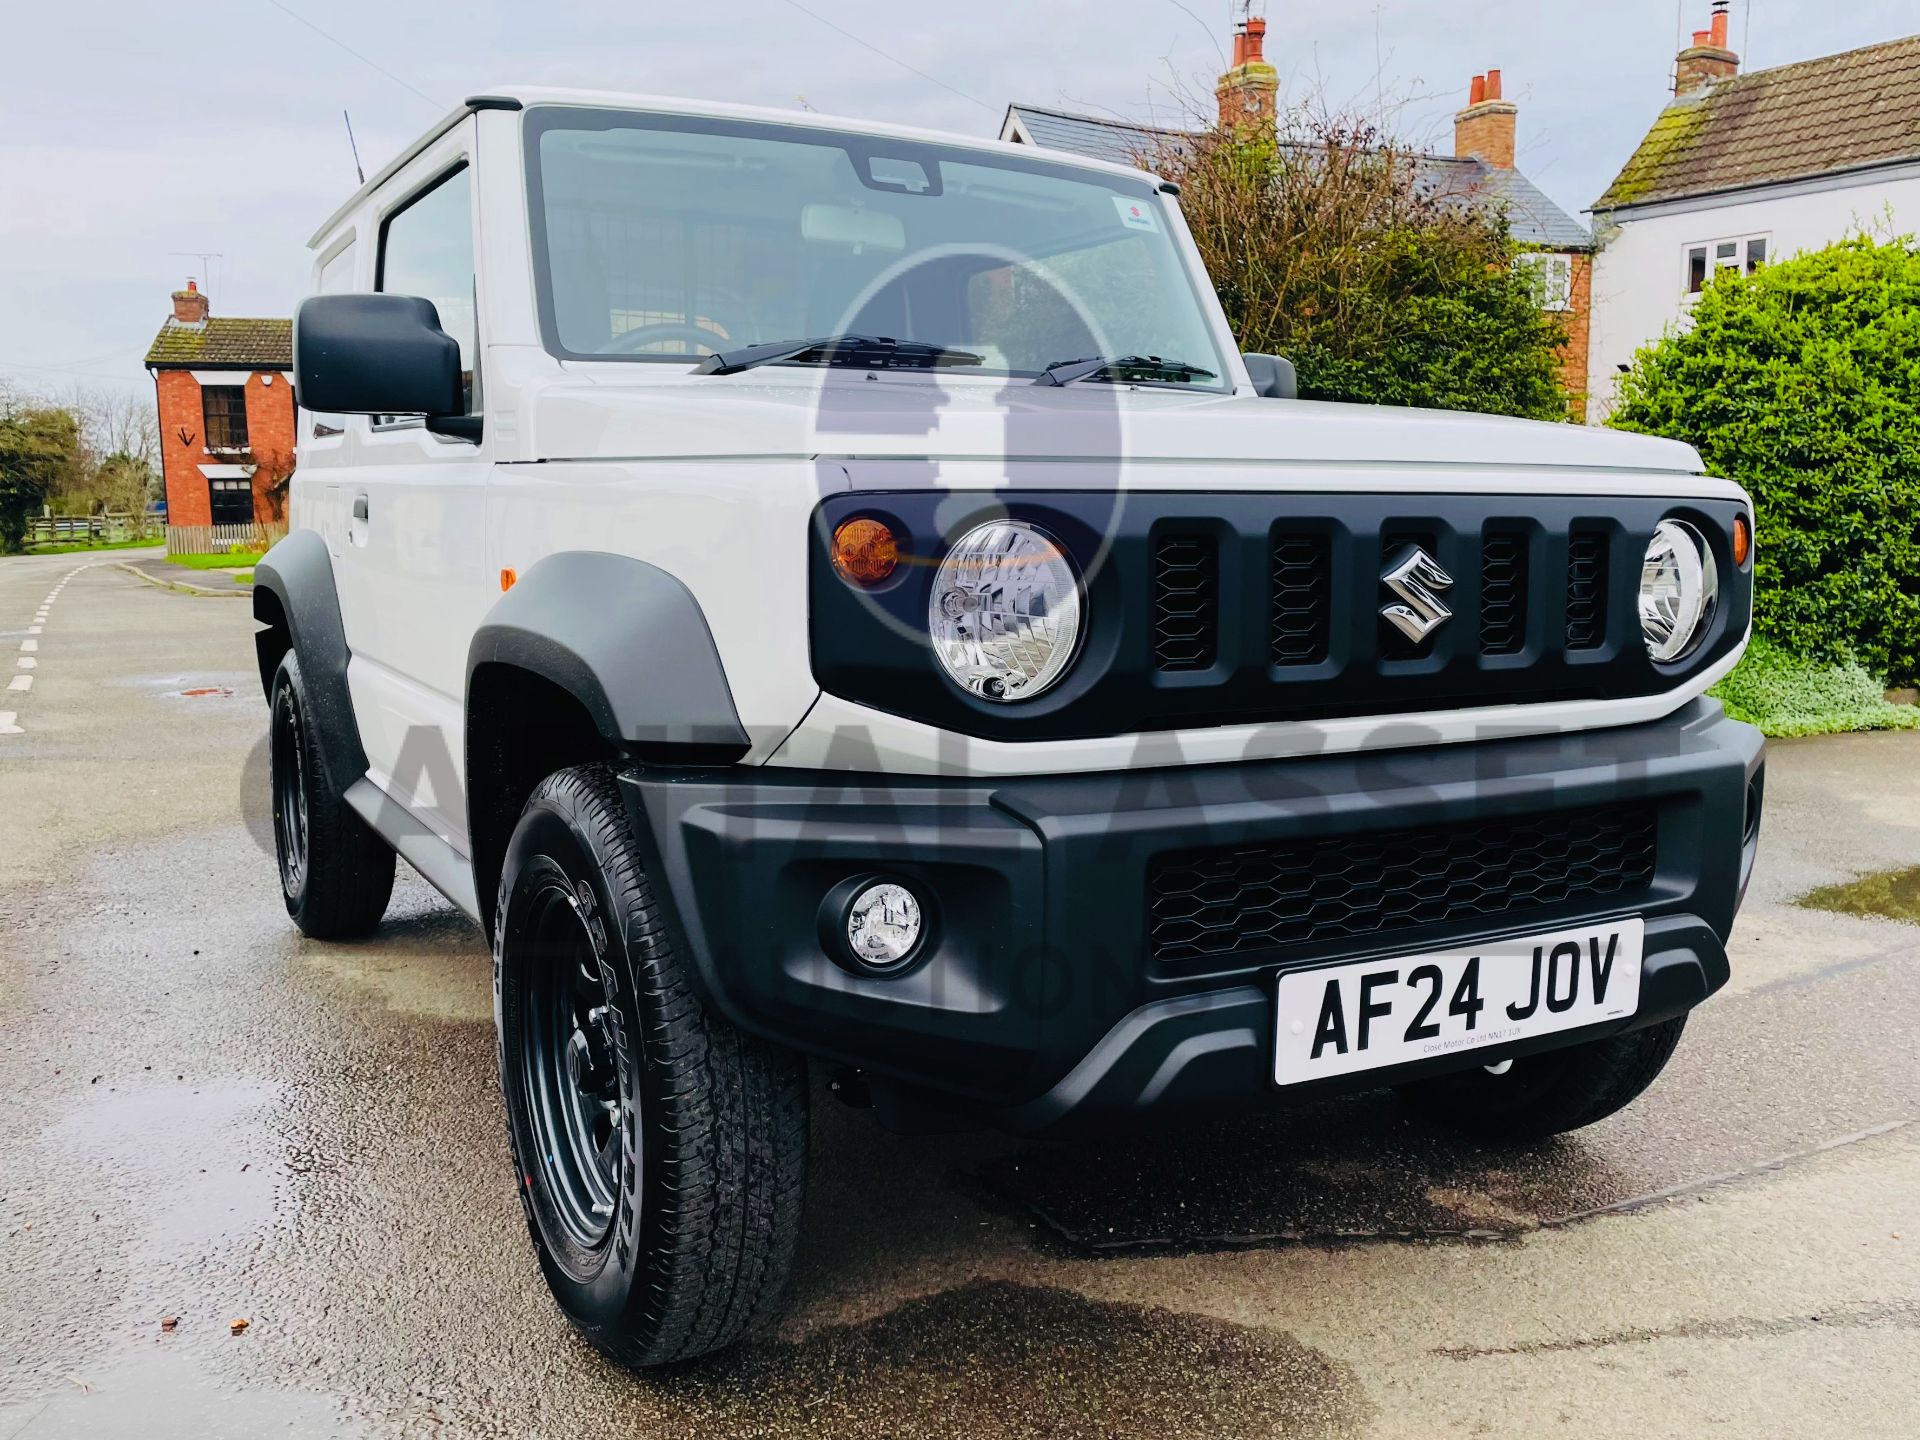 (ON SALE) SUZUKI JIMNY ALLGRIP (24 REG - BRAND NEW) DELIVERY MILEAGE ONLY - BEAT THE WAITING LIST - Image 2 of 24